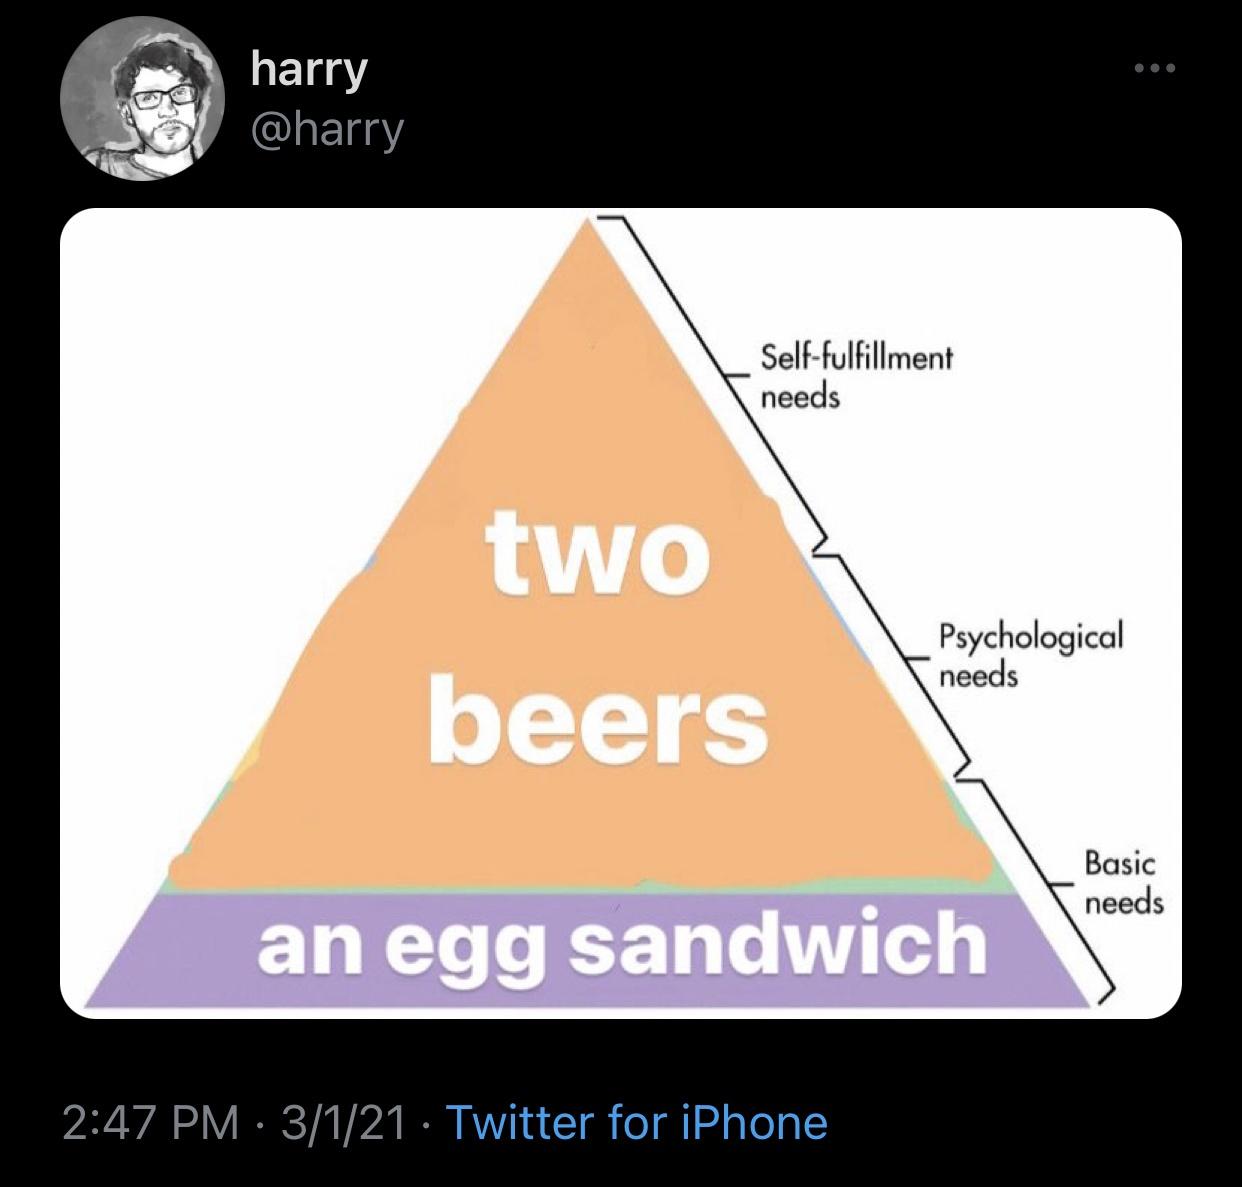 the funniest tweets - triangle - harry Selffulfillment needs two Psychological needs beers Basic needs an egg sandwich 3121 Twitter for iPhone